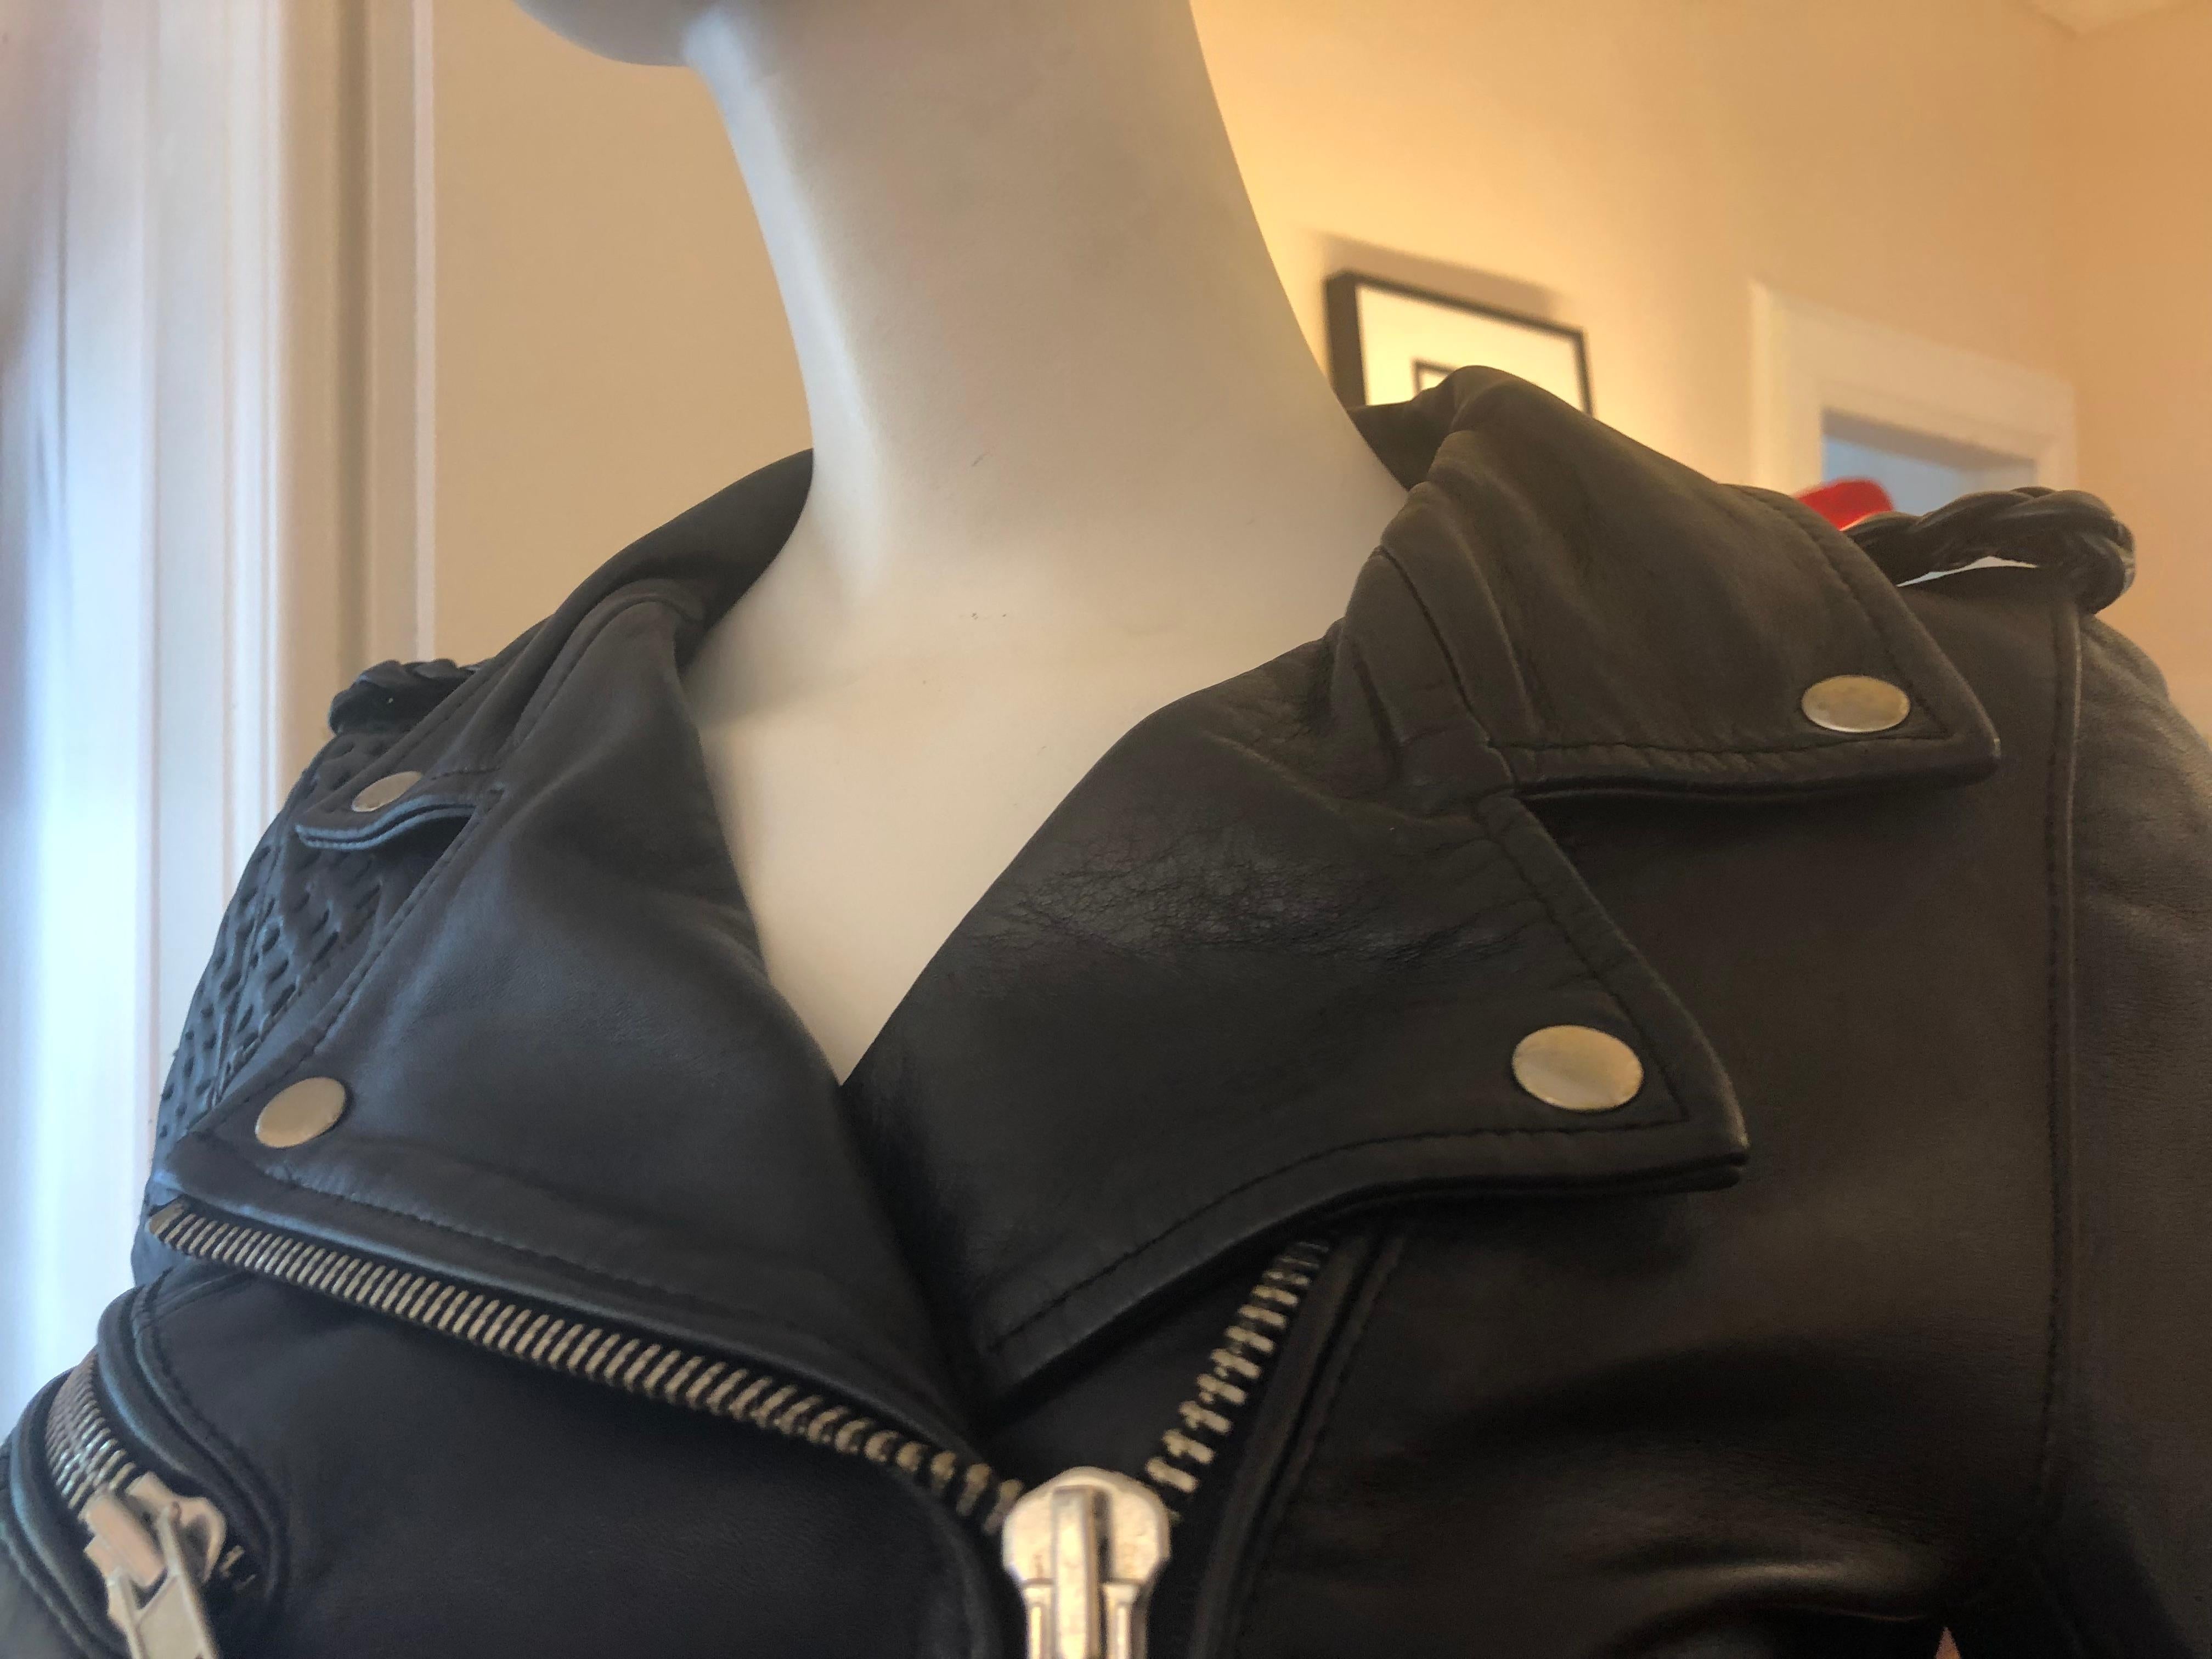 The style is both edgy and classic, with great details such as wide zippers and stud closures. These are all in a silver tone. A very special detail is the woven leather shoulders and epaulettes. This jacket will complement most outfits, and the